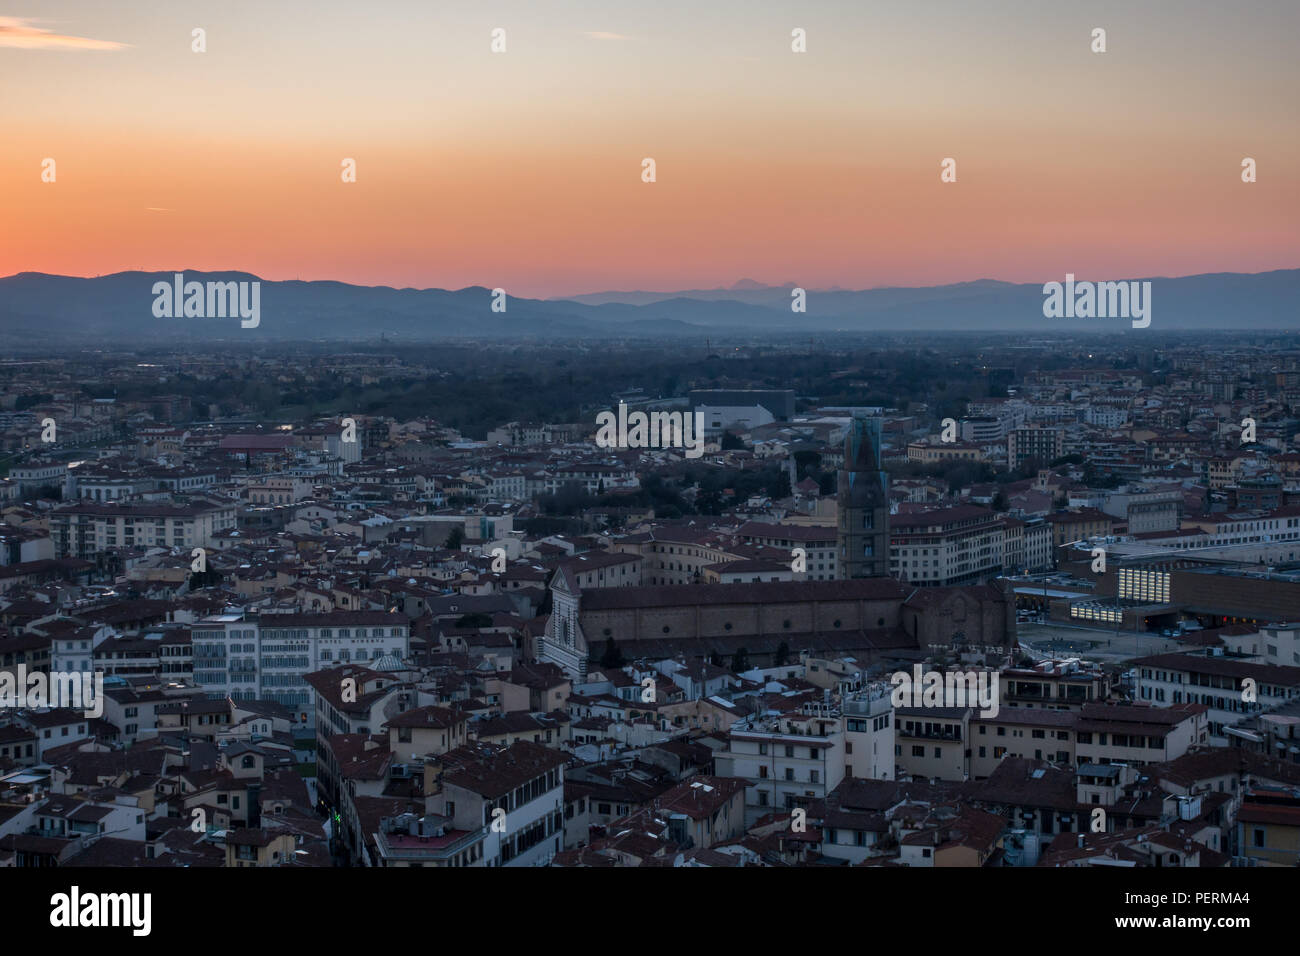 Florence, Italy - March 23, 2018: The sun sets over the hills of Tuscany and the cityscape of Florence, viewed from above. Stock Photo